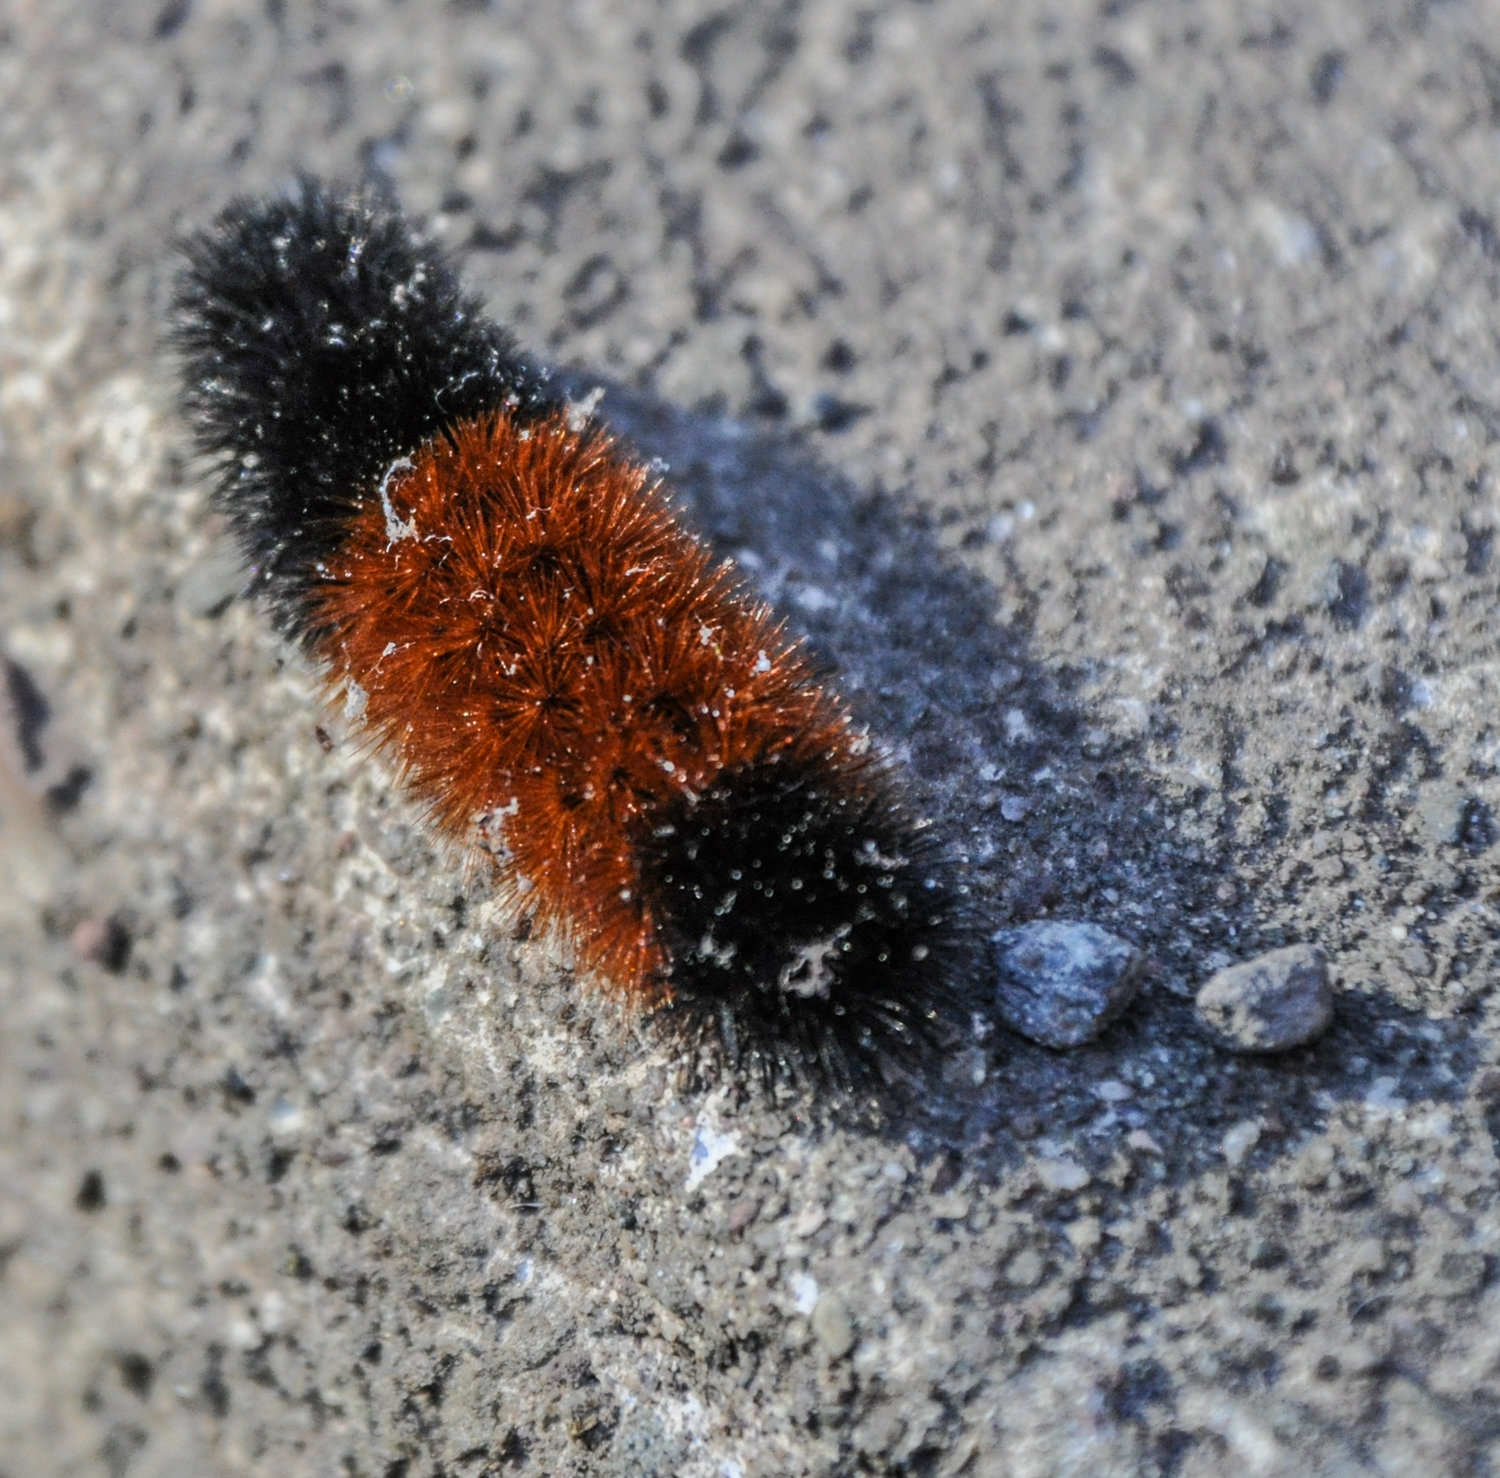 I eagerly anticipate finding and photographing the psychic woolly bear every year. This one was particularly fuzzy. Uh oh.